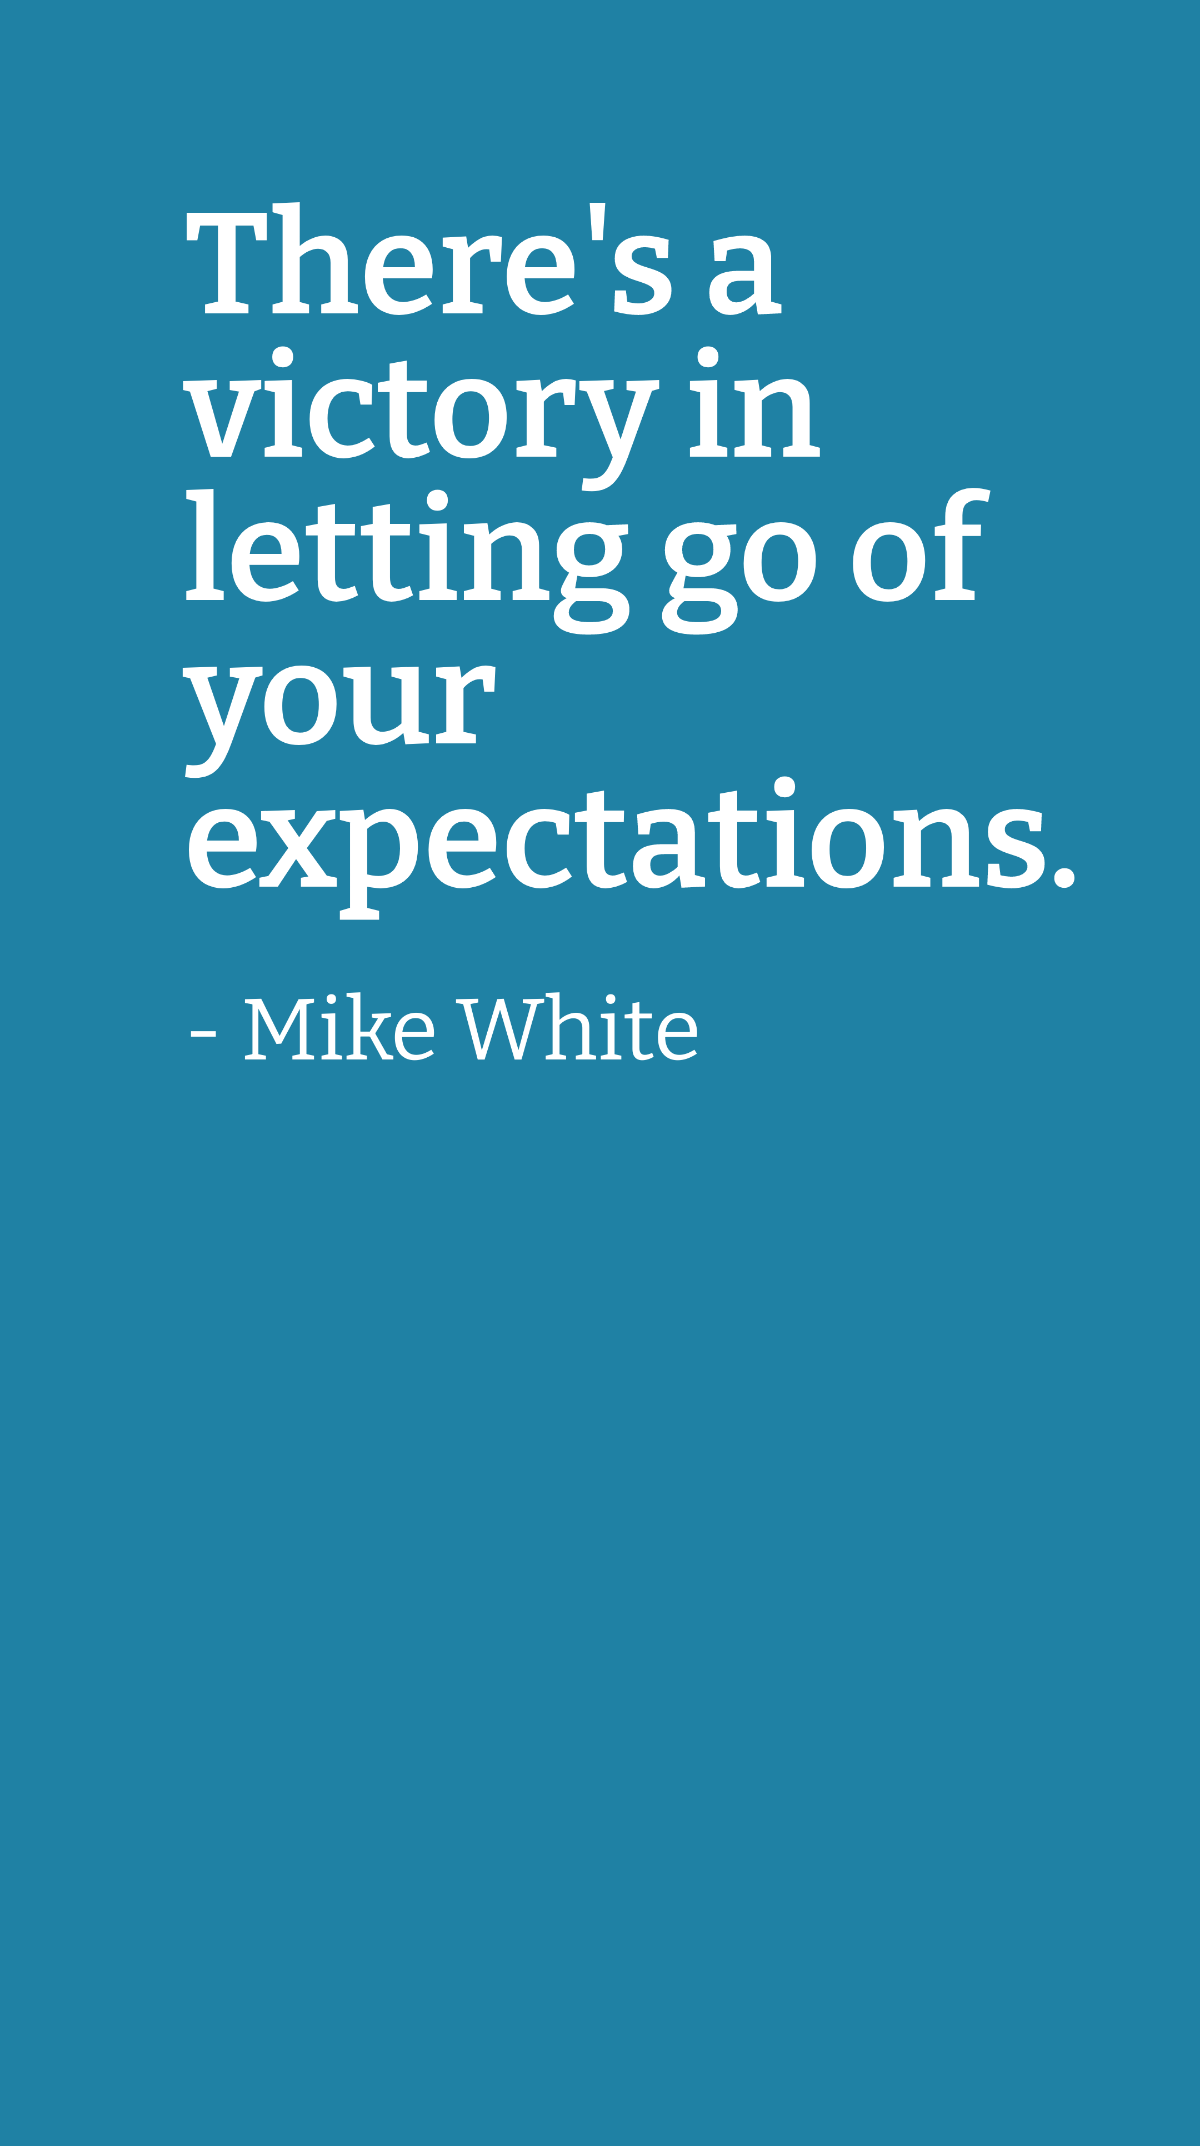 Free Mike White- There's a victory in letting go of your expectations. Template